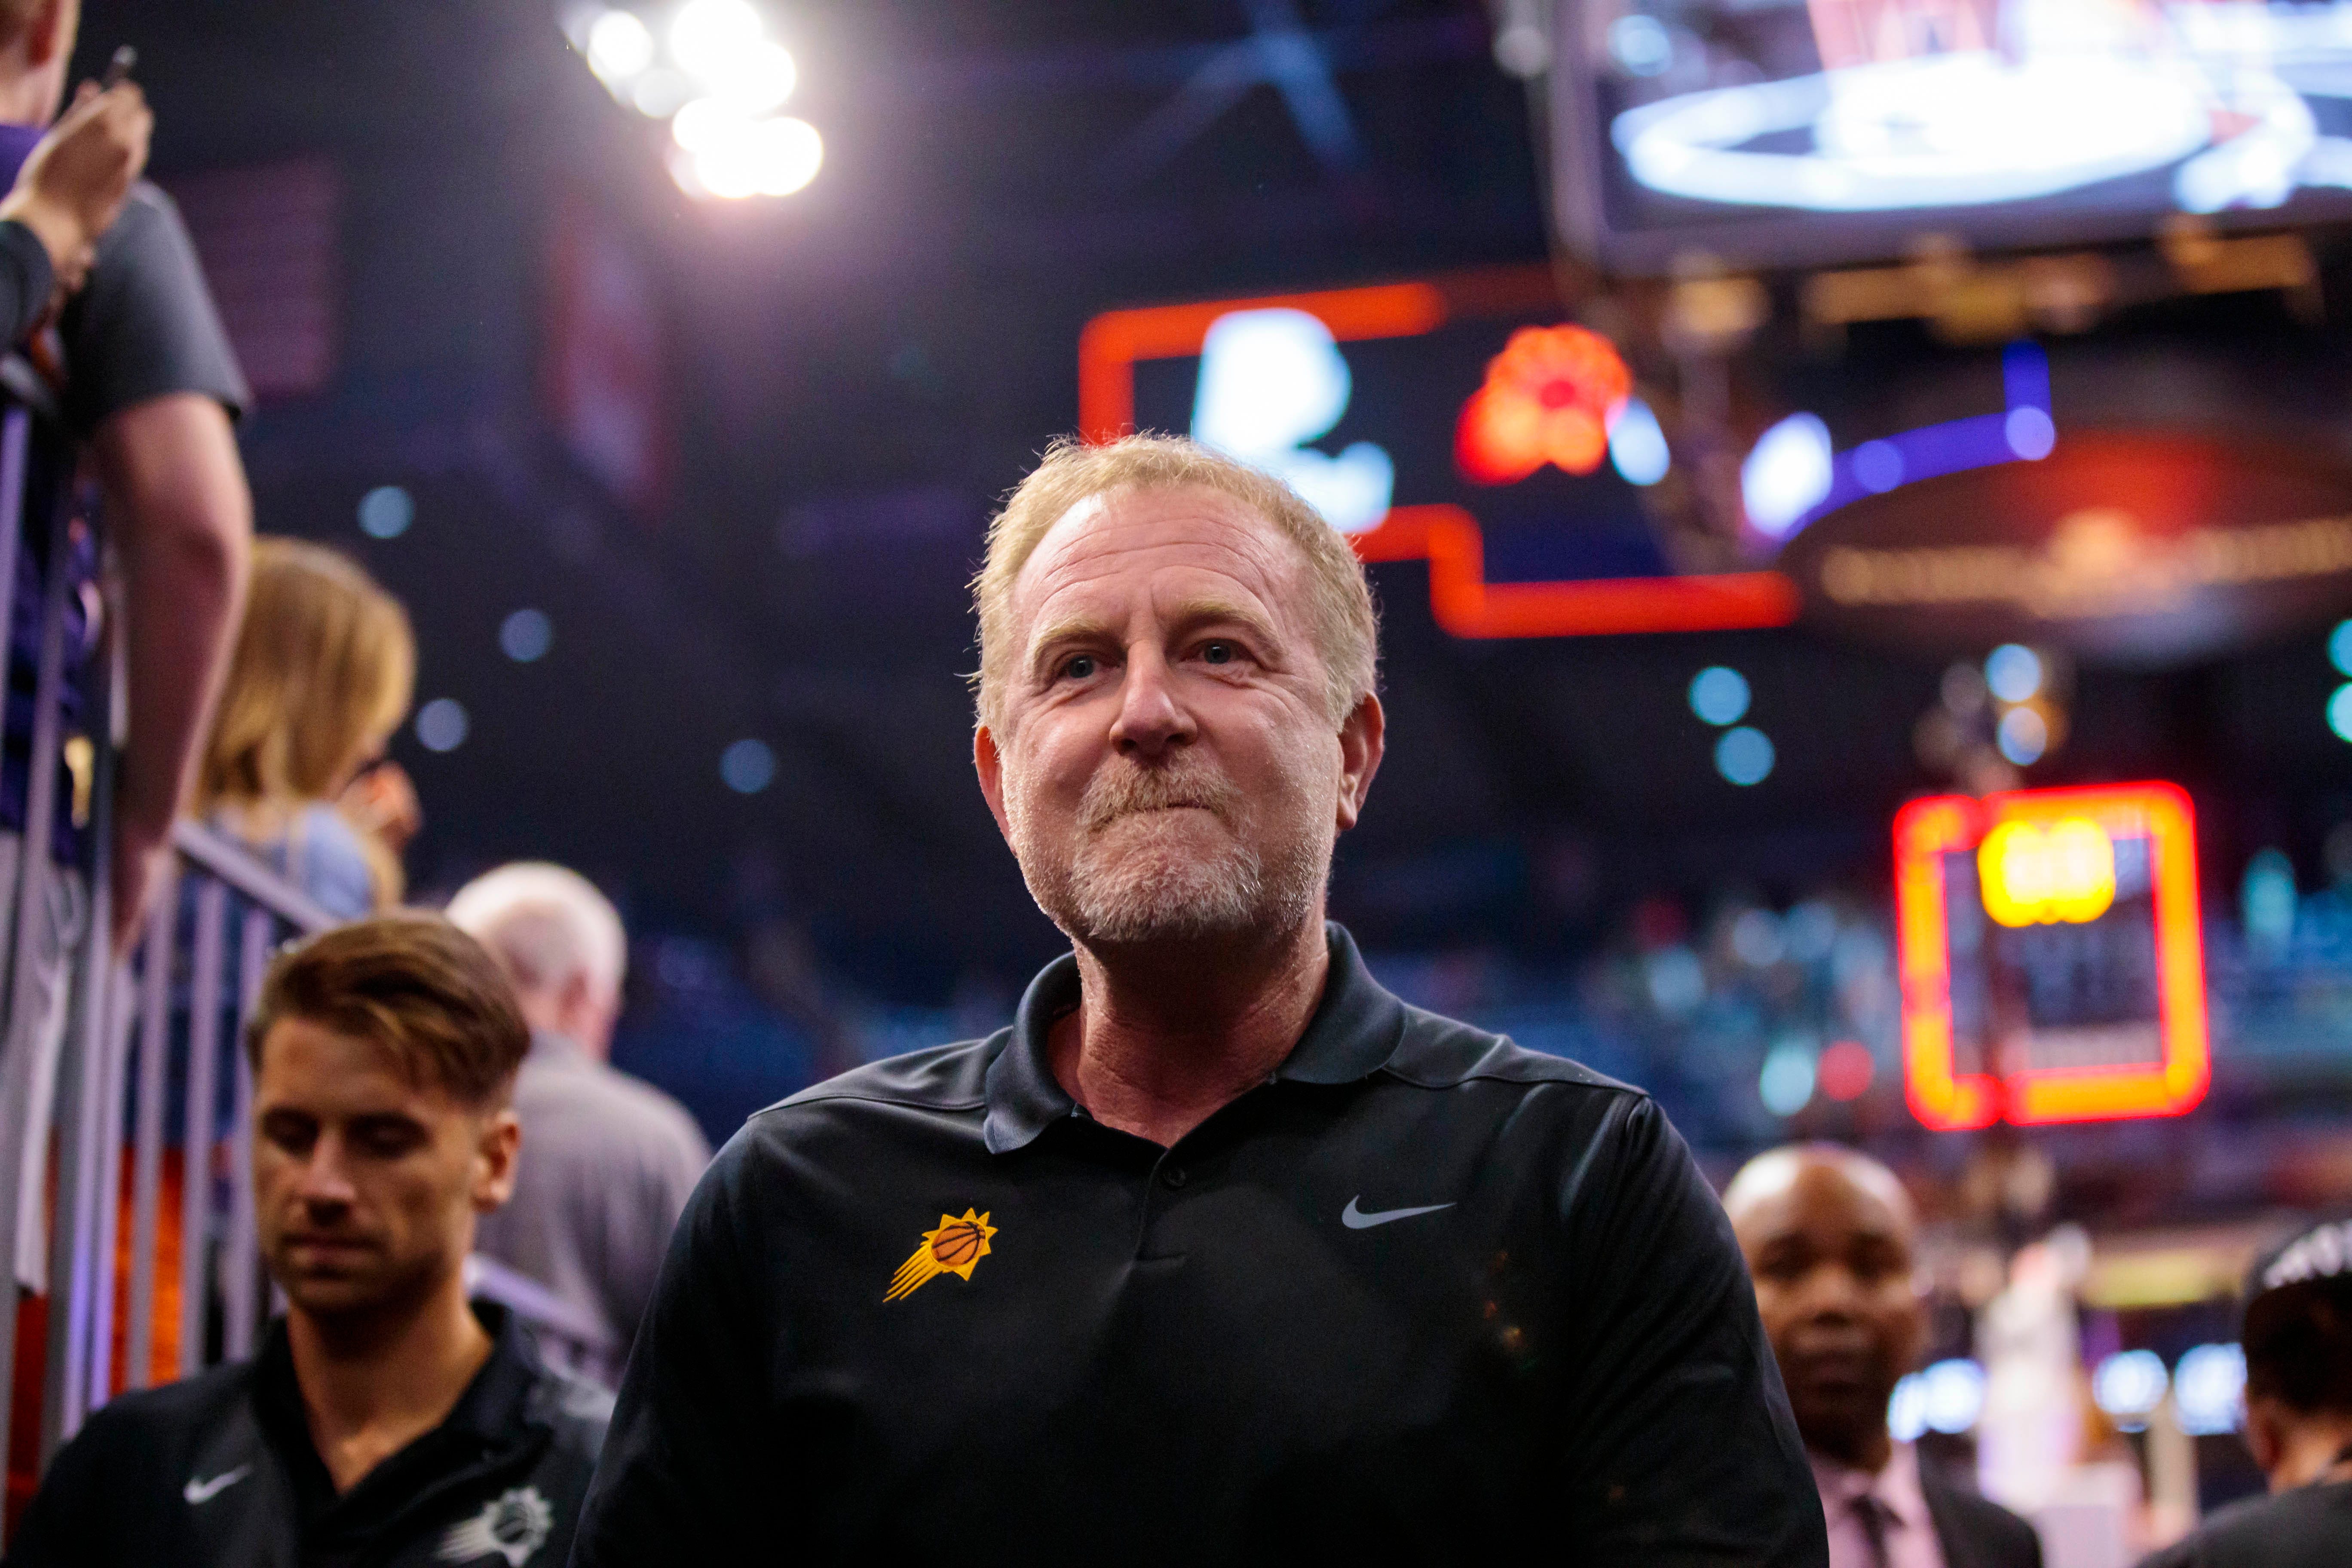 Phoenix Suns owner Robert Sarver slapped with a one-year ban and a $10m for misconduct